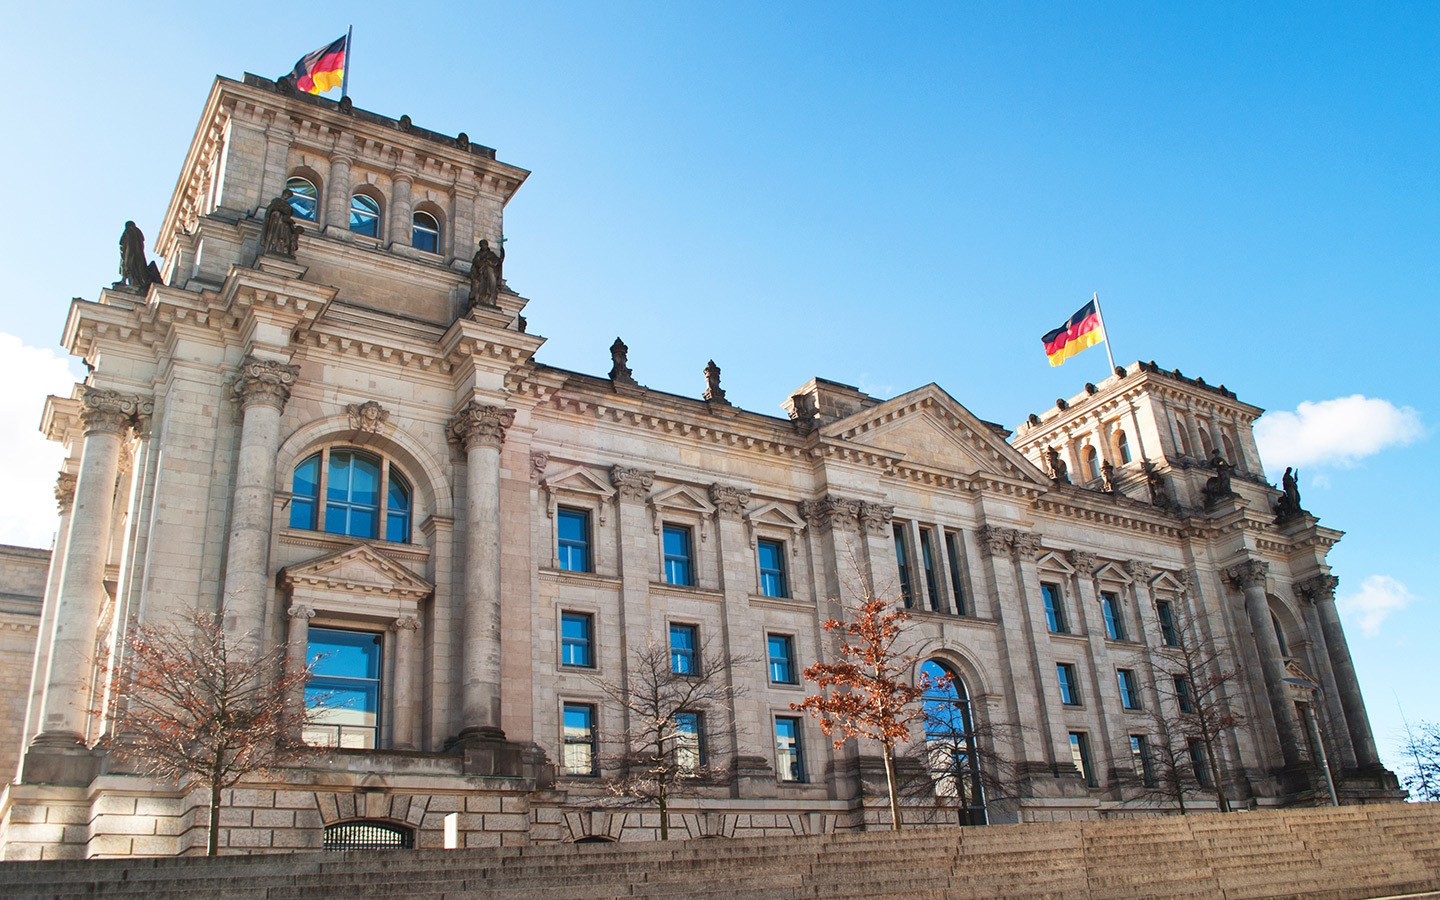 The Reichstag parliament building in Berlin